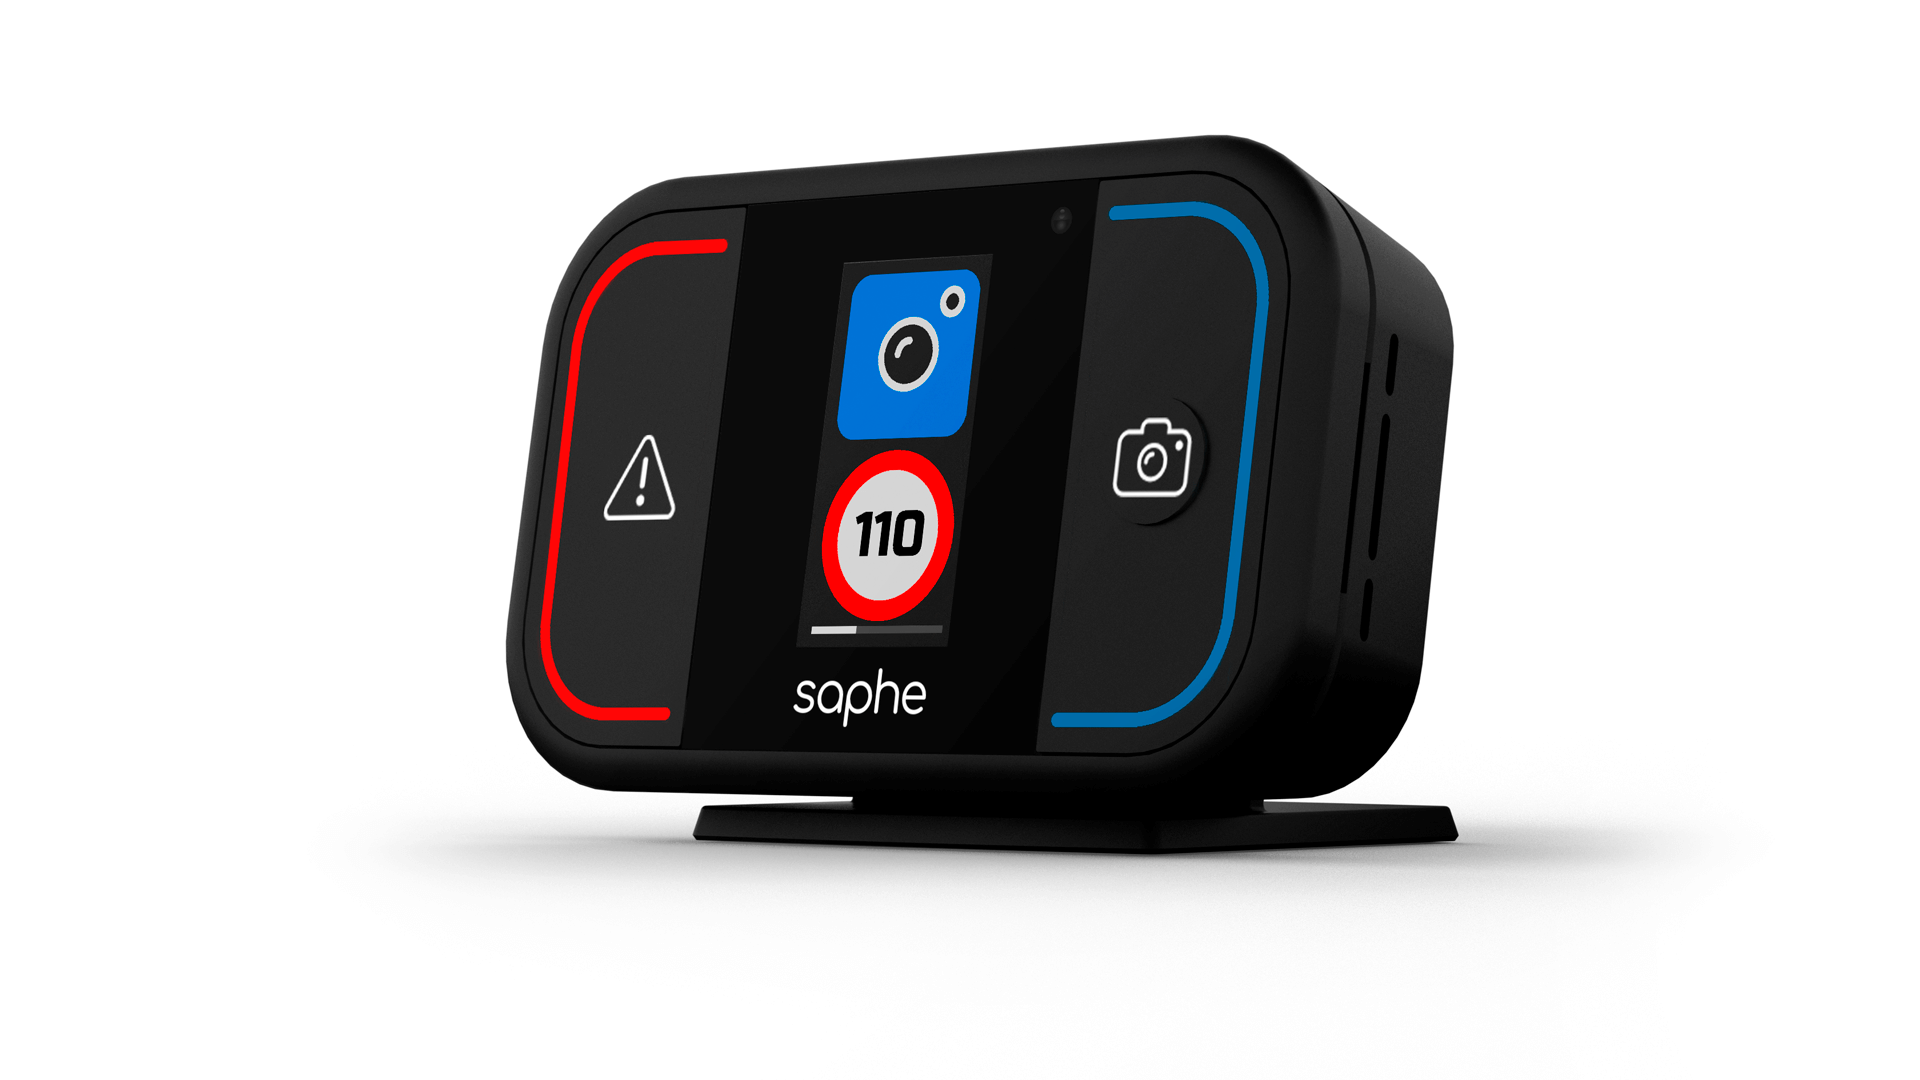 Cre8tek is the new contract manufacturer for the Saphe Drive